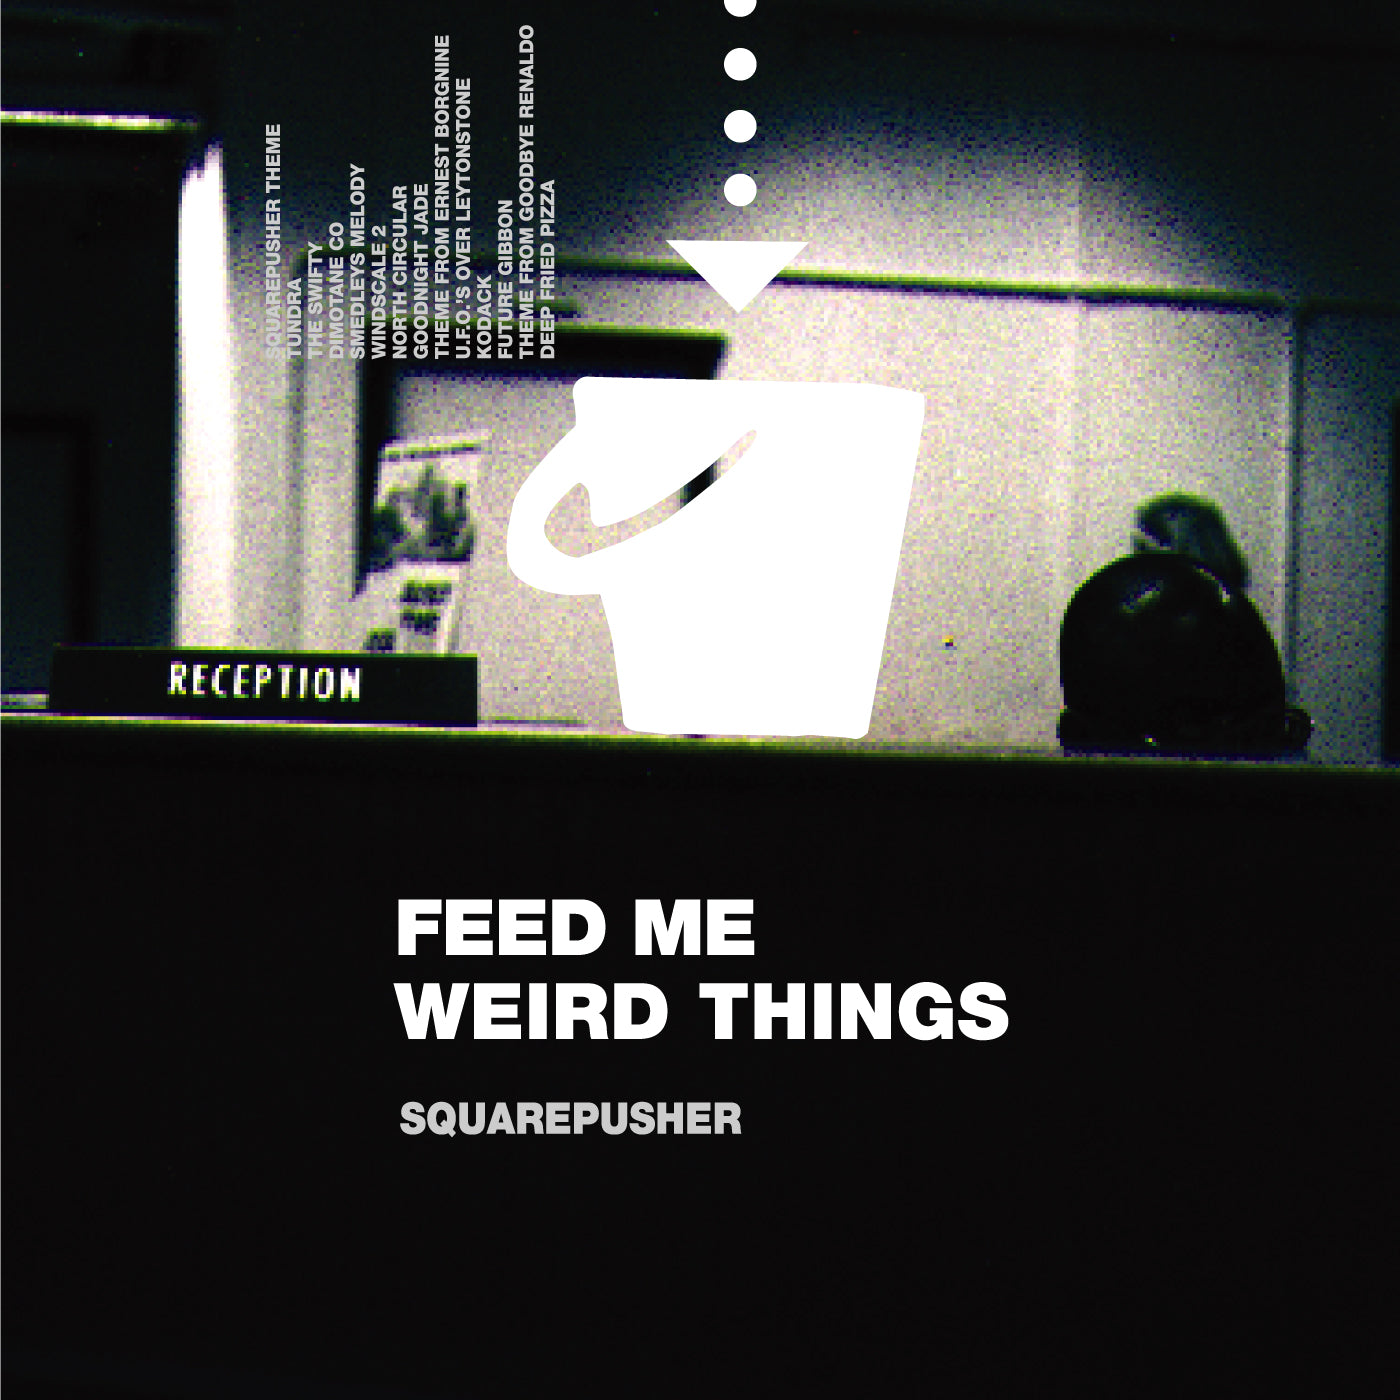 Squarepusher - Feed Me Weird Things (Special 25th Anniversary Edition 2LP Clear Vinyl + 10")